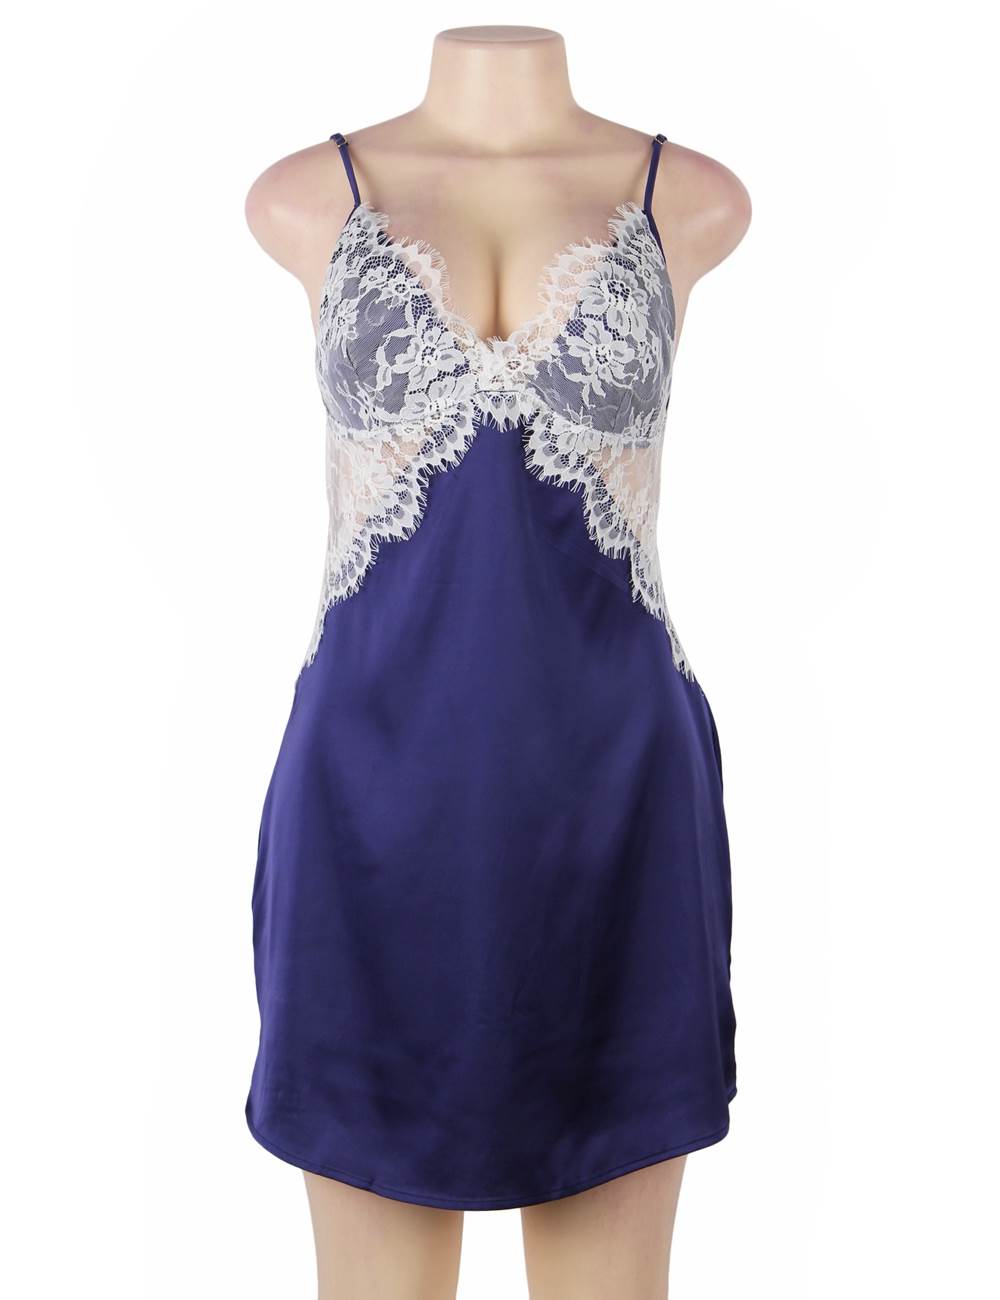 Loveangels Satin Lace Stitching Open Back Babydoll